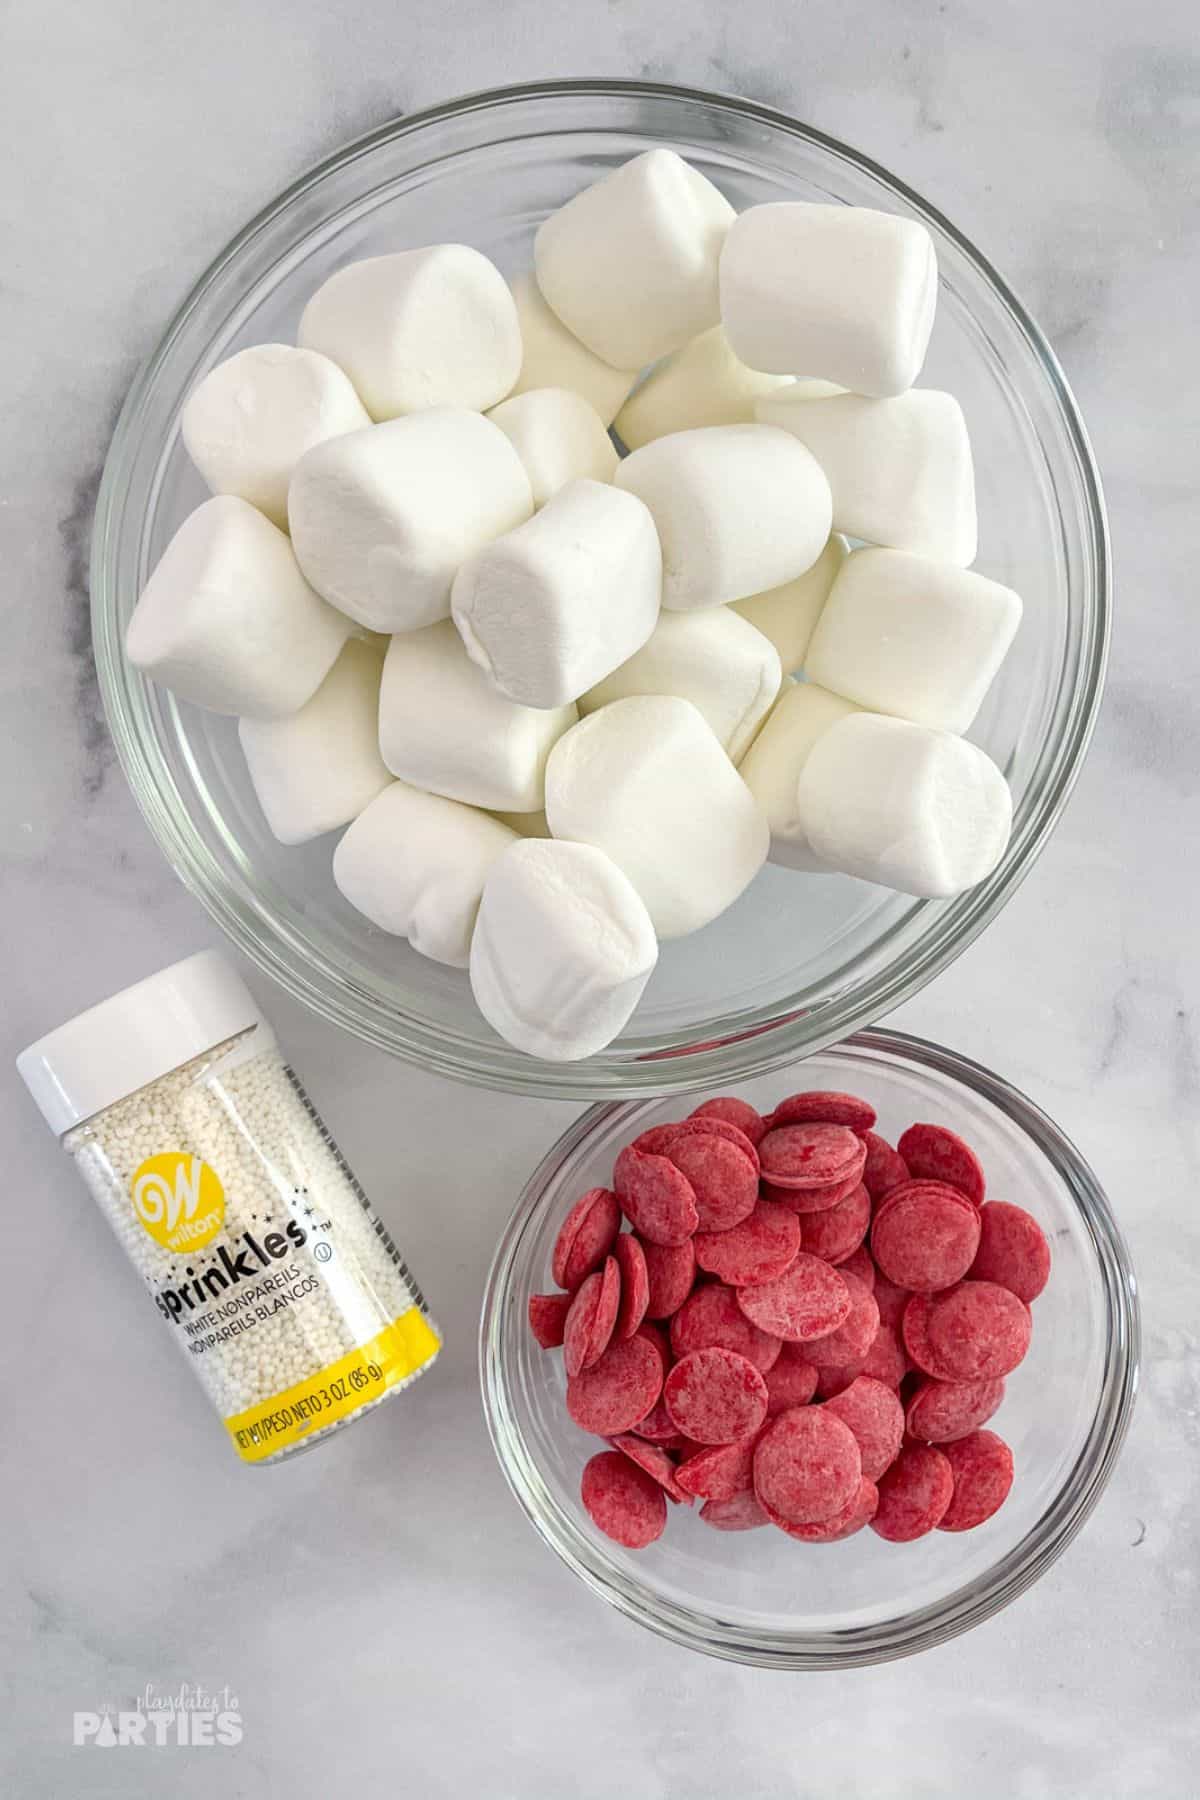 Ingredients on a white surface - marshmallows, red candy melts, and white sprinkles.